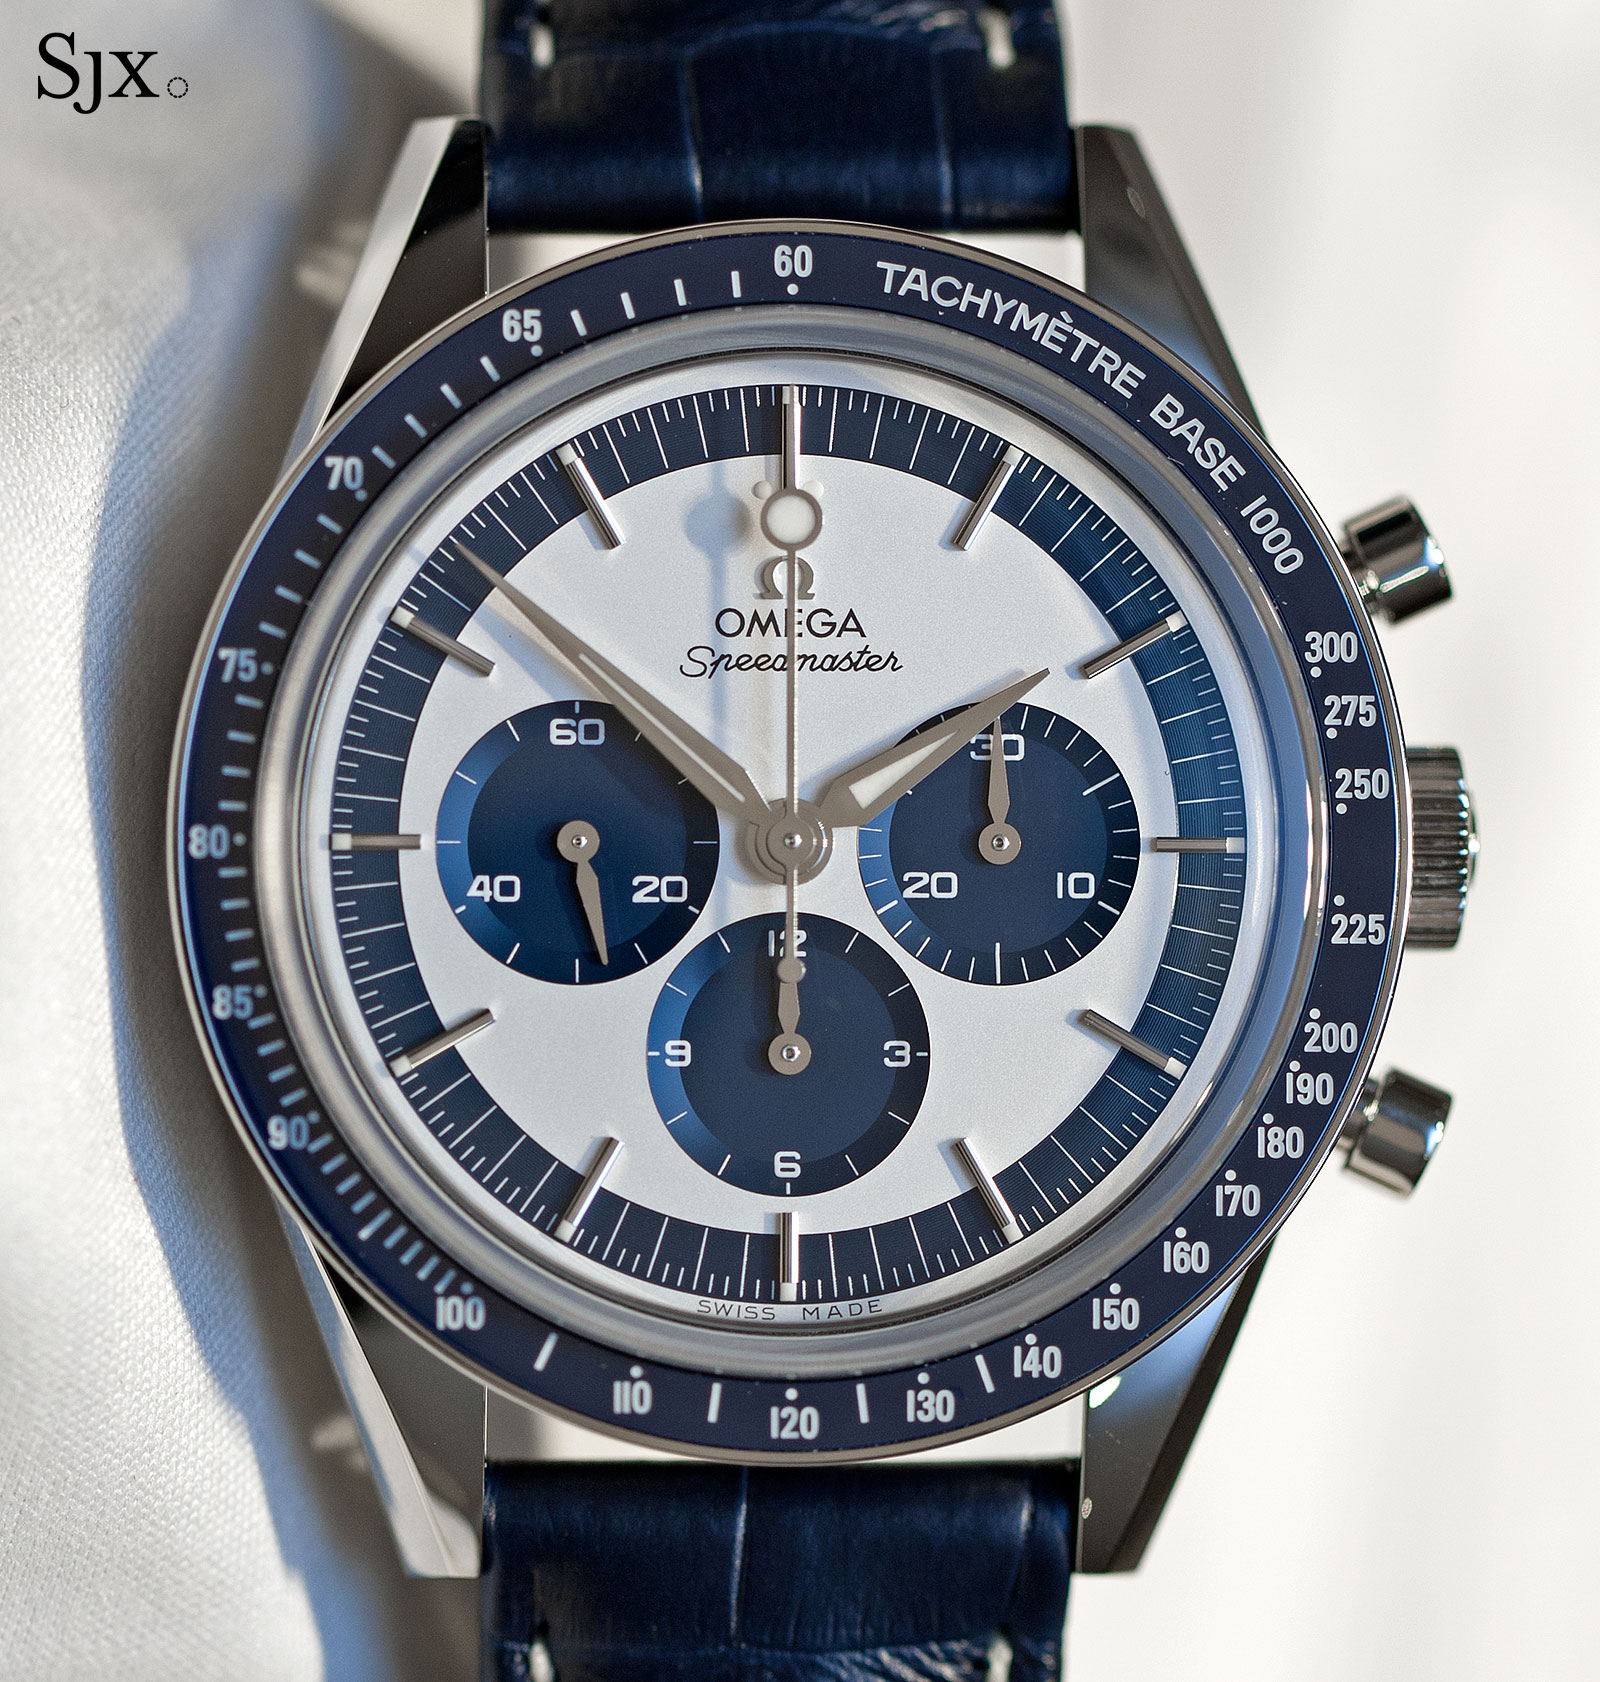 Omega CK2998 limited edition